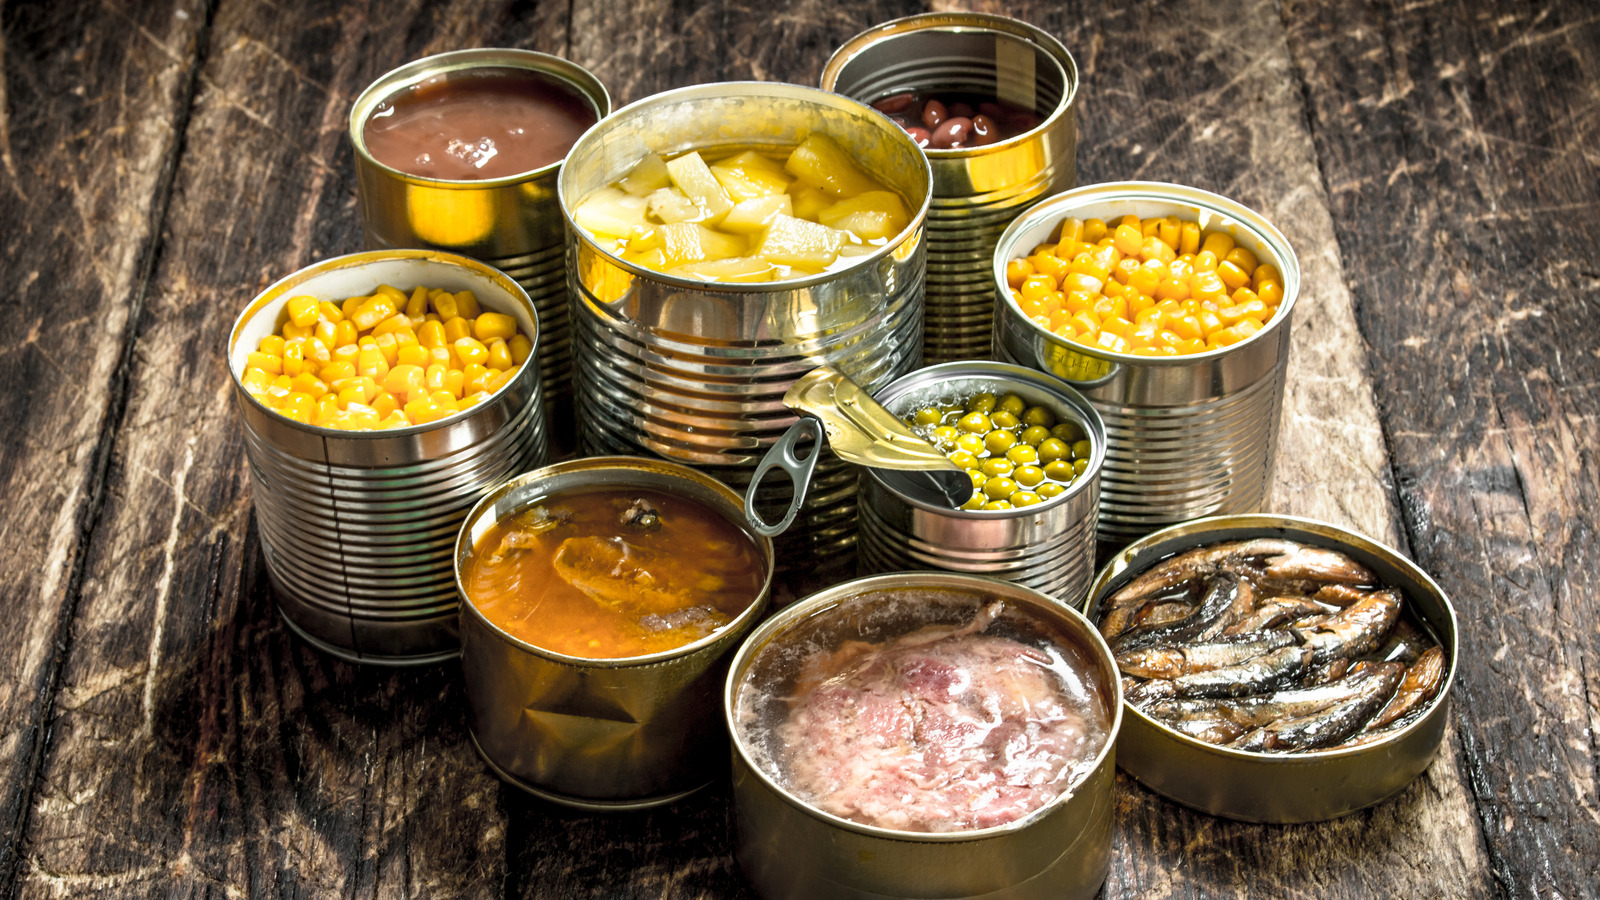 Why You Should Never Cook Canned Food This Way